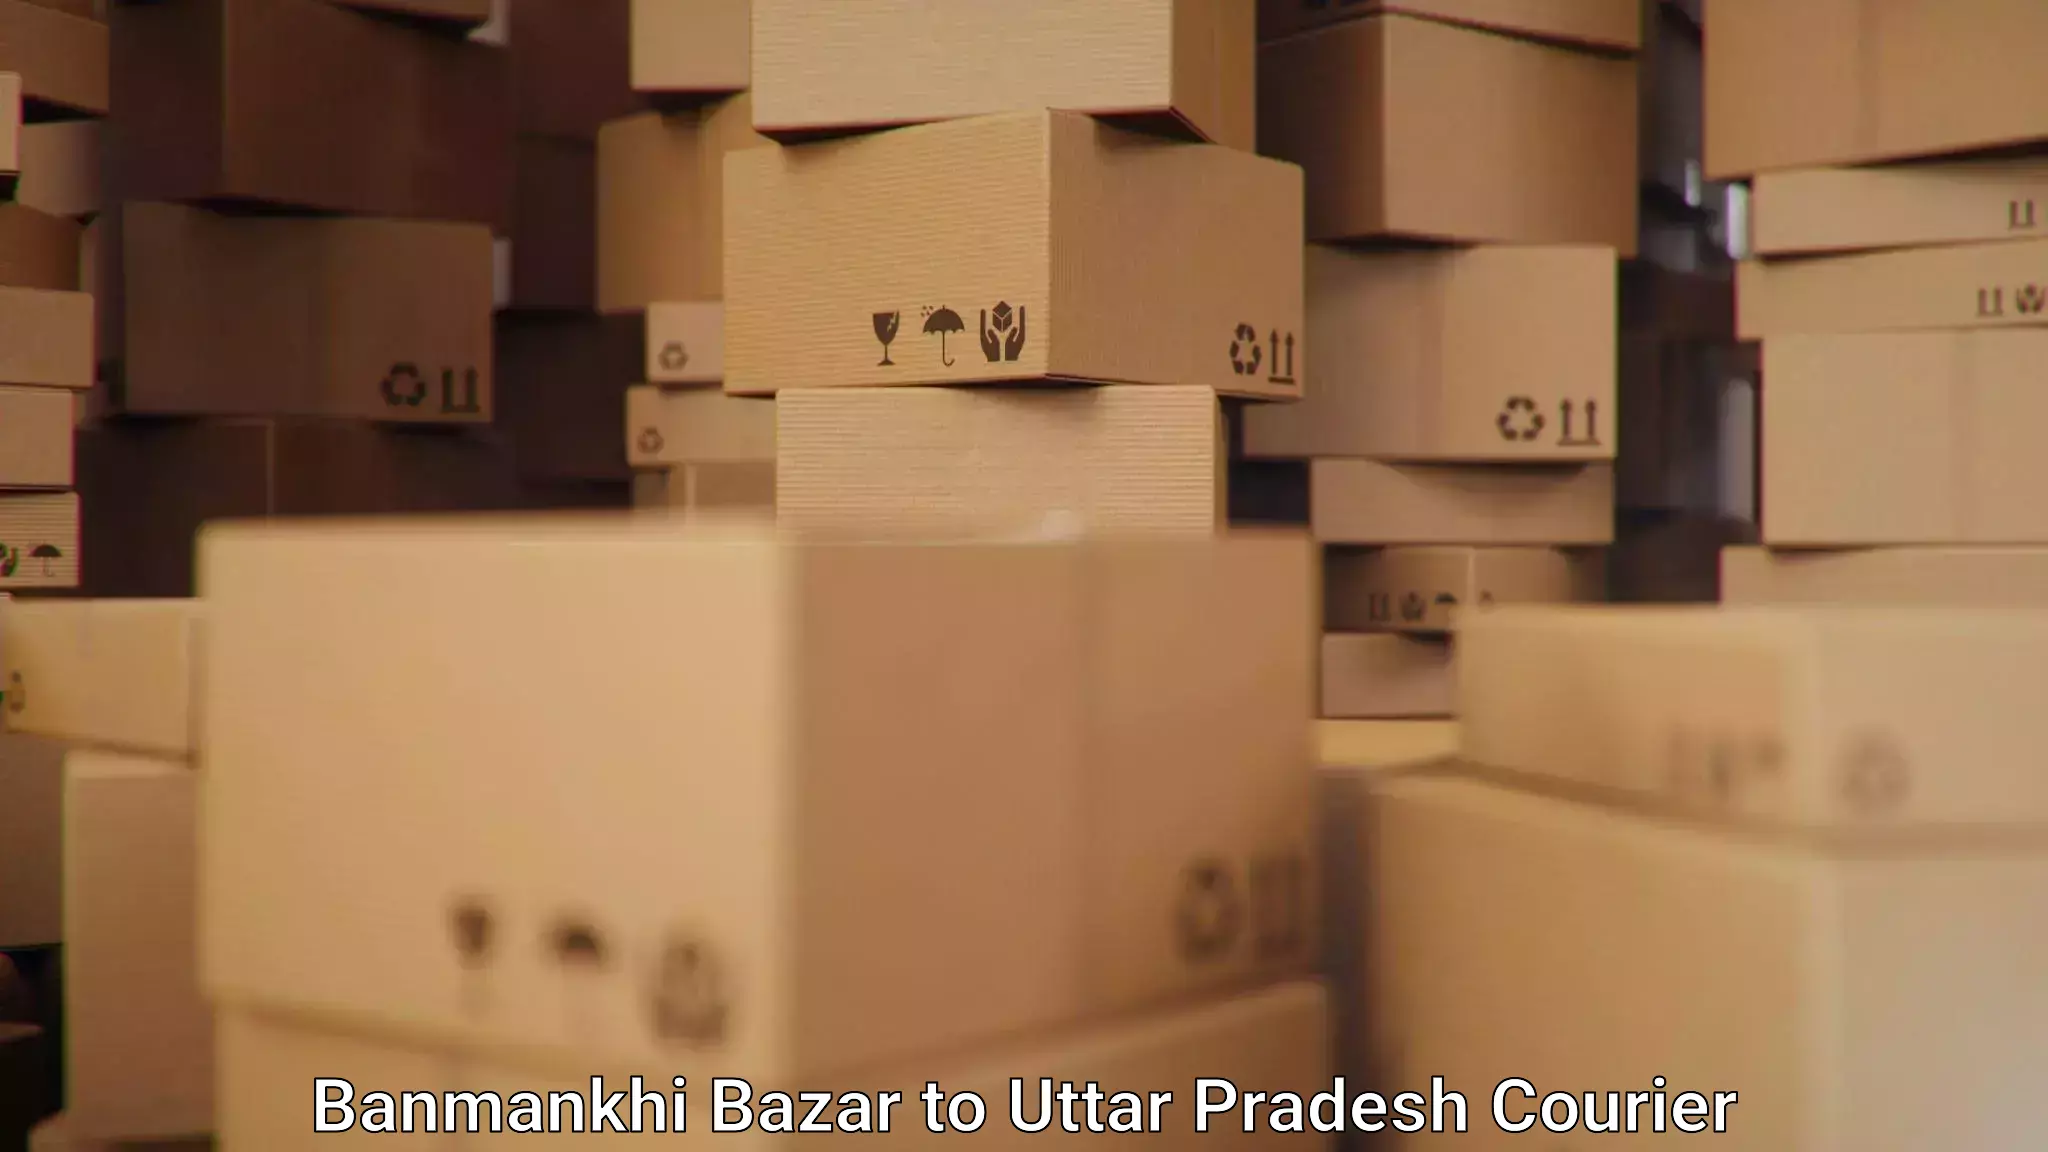 Multi-national courier services Banmankhi Bazar to Siyana